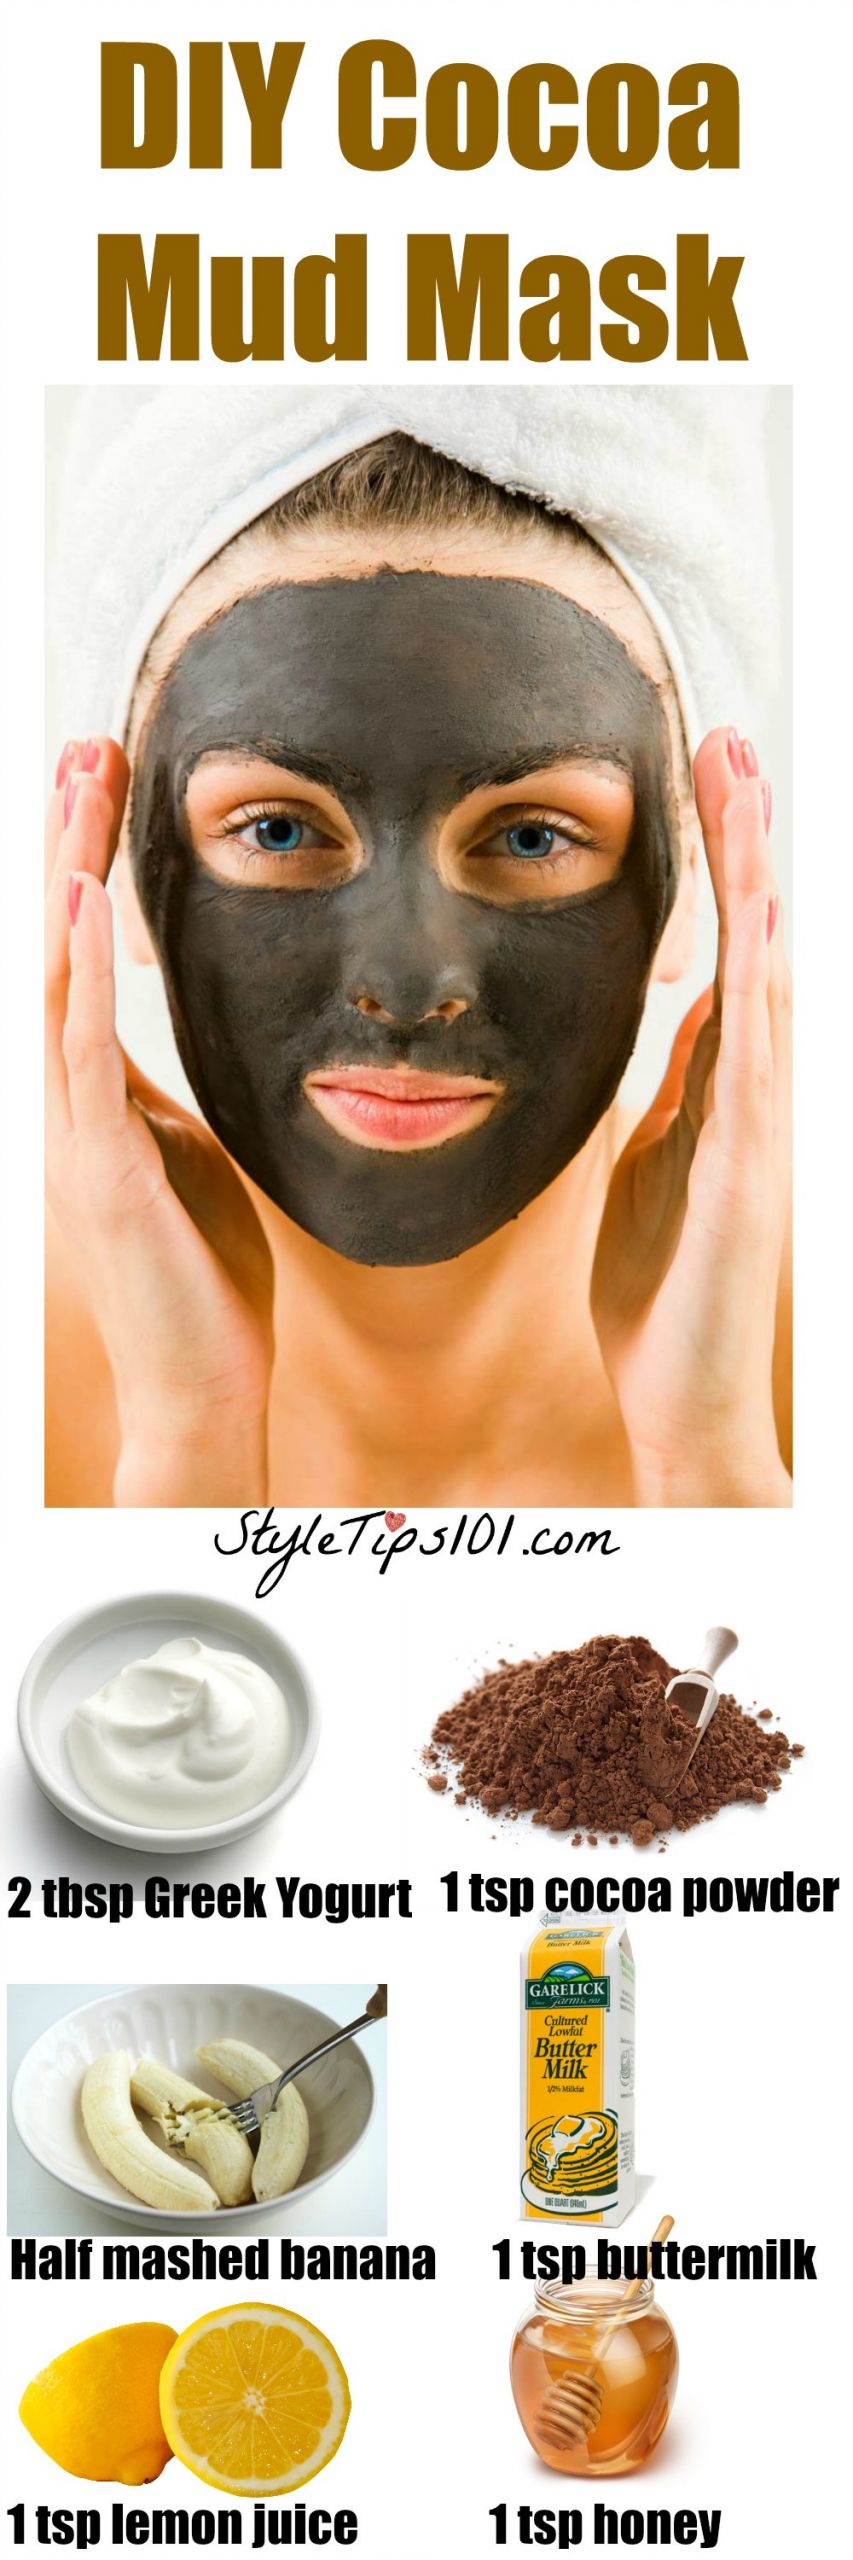 DIY Skin Mask
 DIY Mud Mask For Acne Prone and Oily Skin